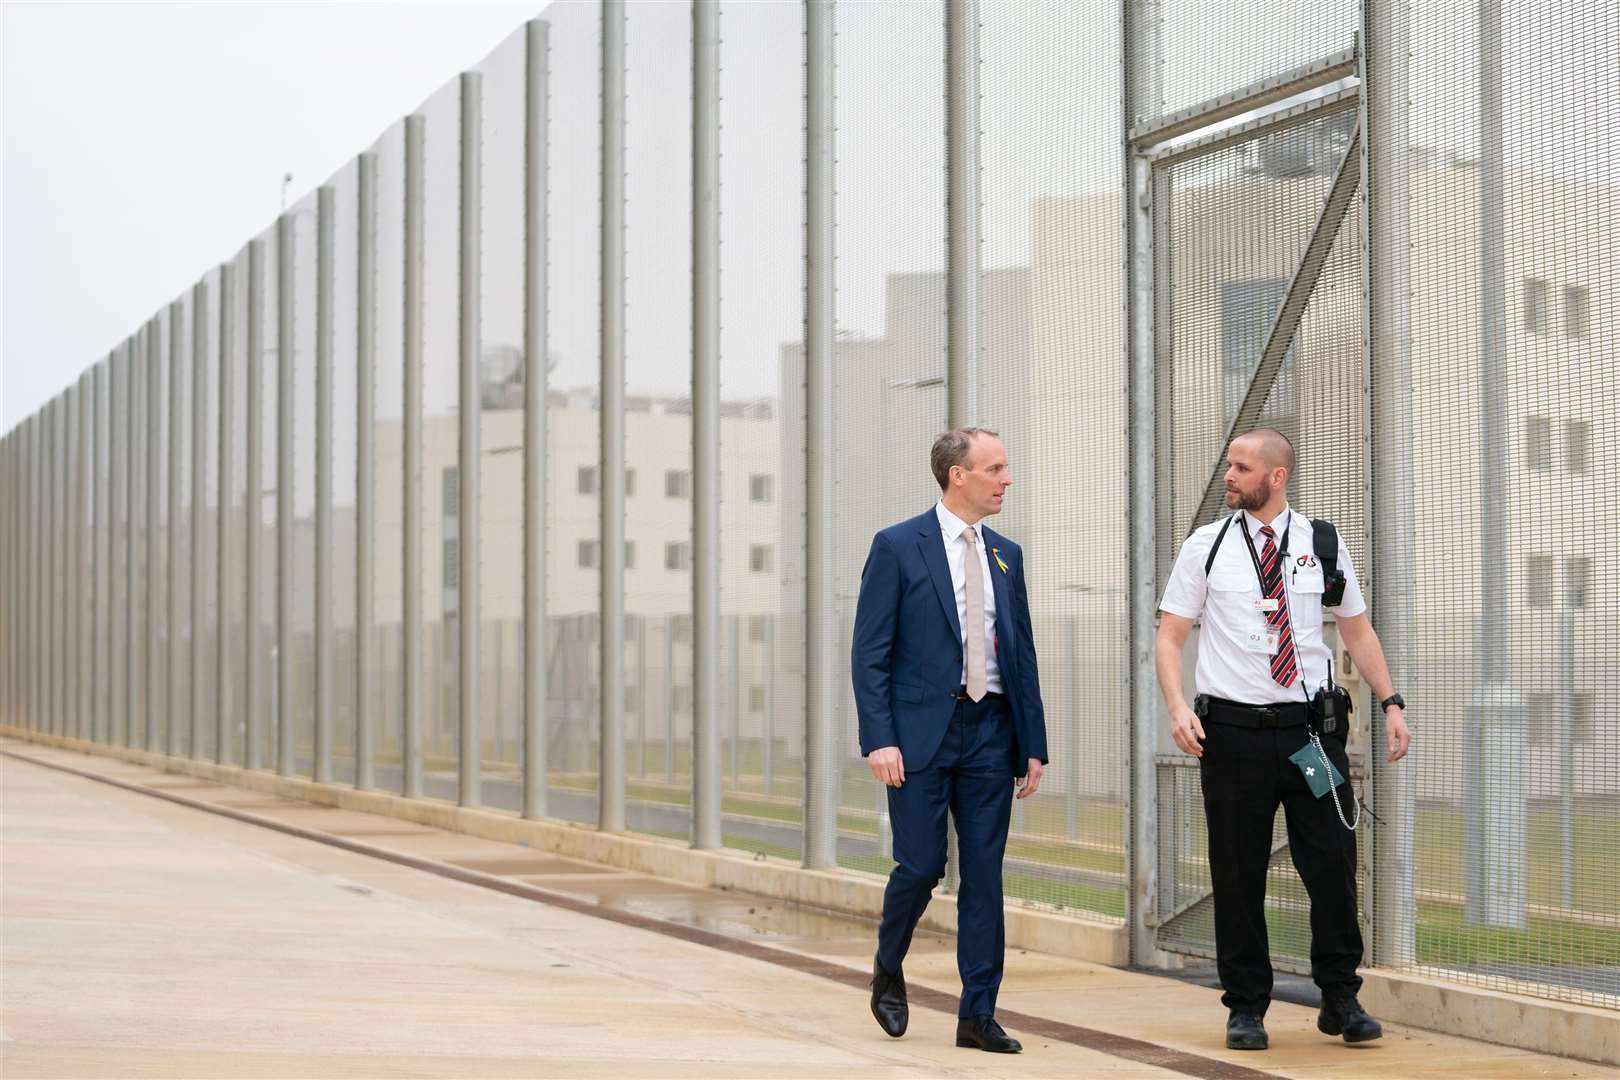 Deputy Prime Minister and Justice Secretary Dominic Raab with a prison officer at the opening of HMP Five Wells in Wellingborough in March (Joe Giddens/PA)